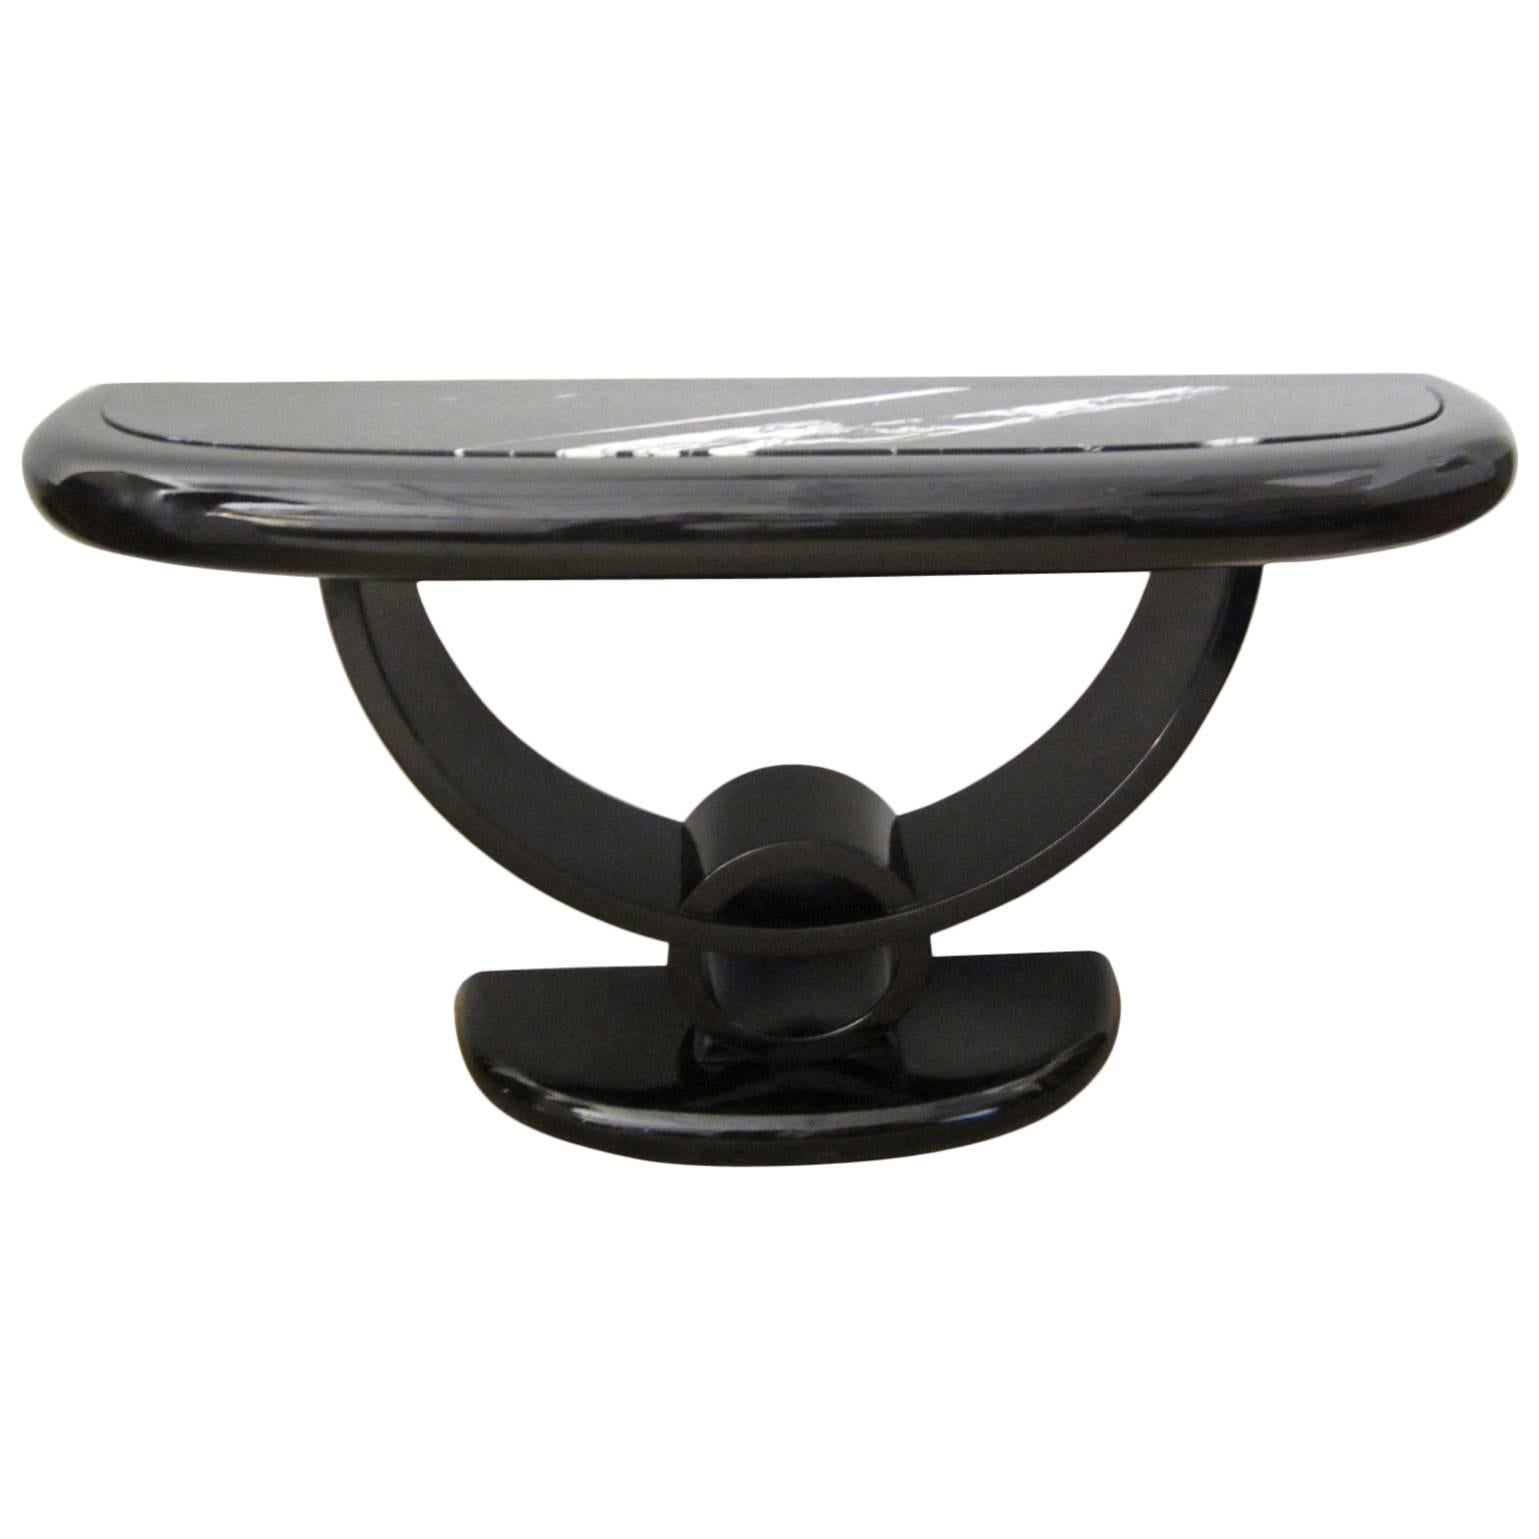 Sculptural black lacquered console table with elegant black and white marble inset top. Some nicks on sides and minor scuffs on bottom but table shines and looks great.
